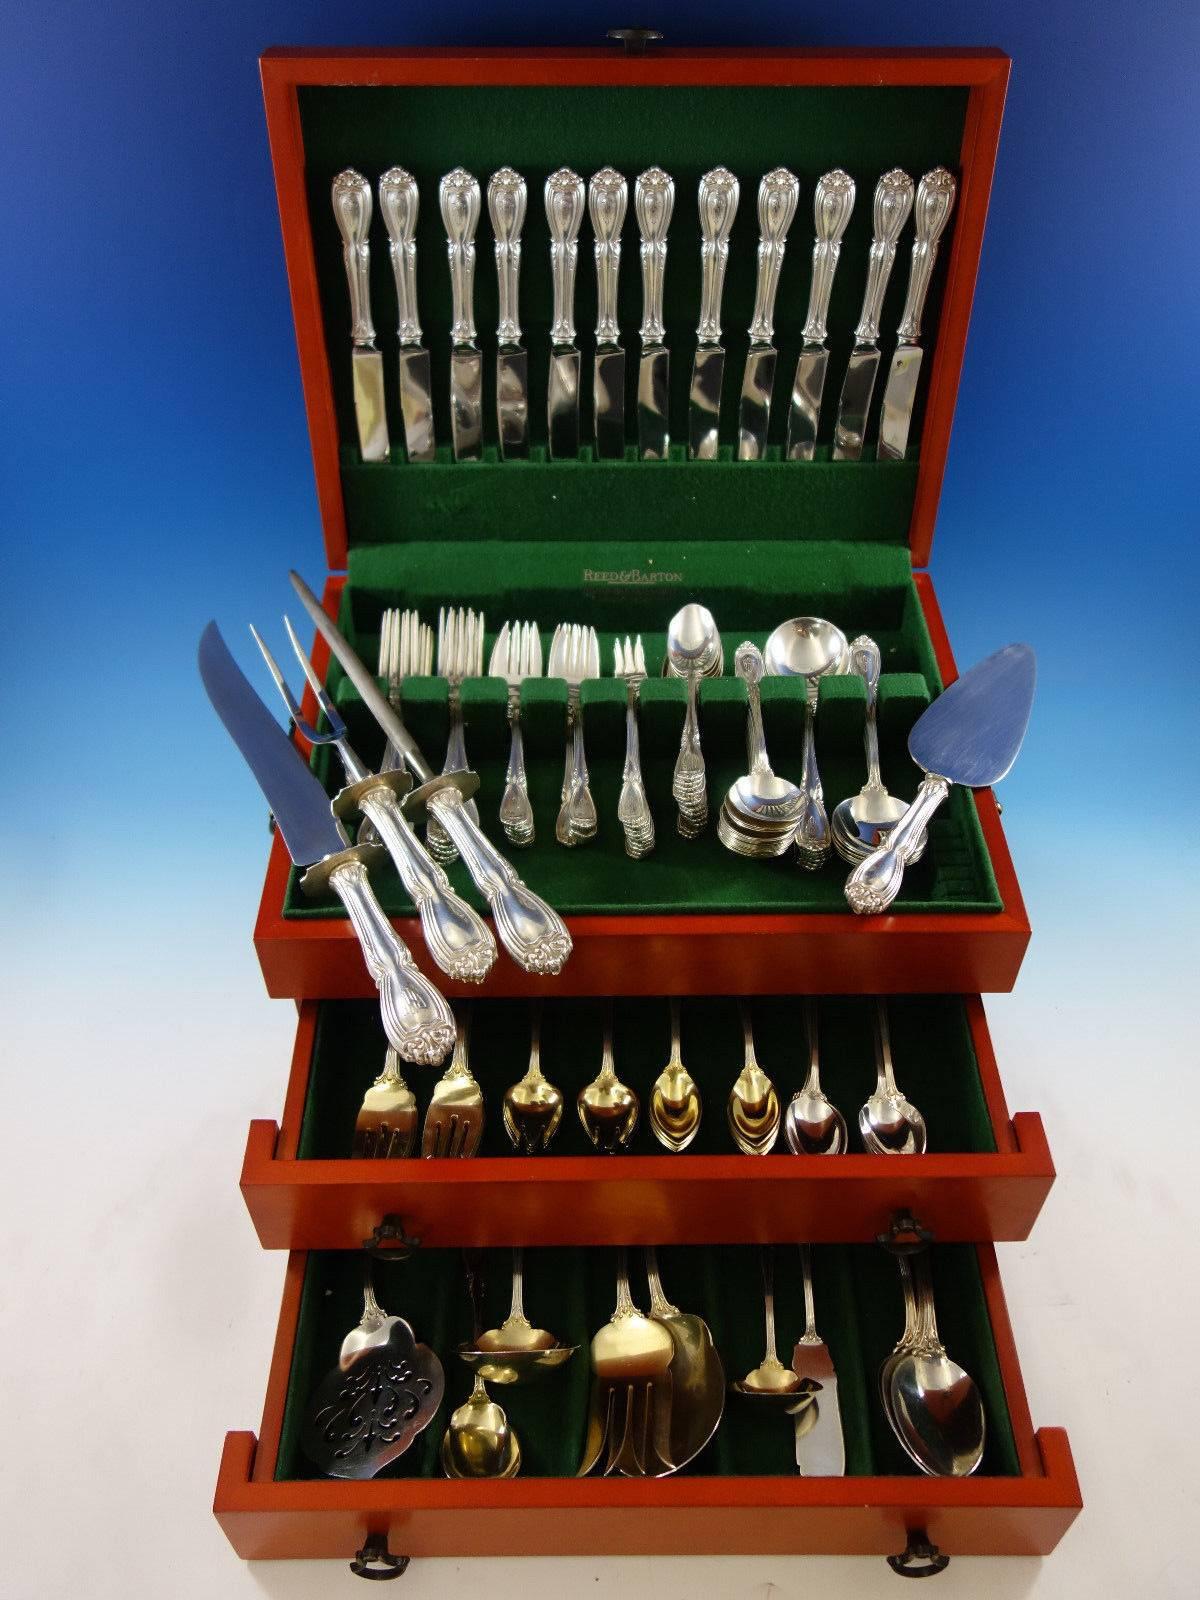 Wellington by Durgin sterling silver flatware set, 146 pieces. This set includes: 

12 knives, 8 7/8